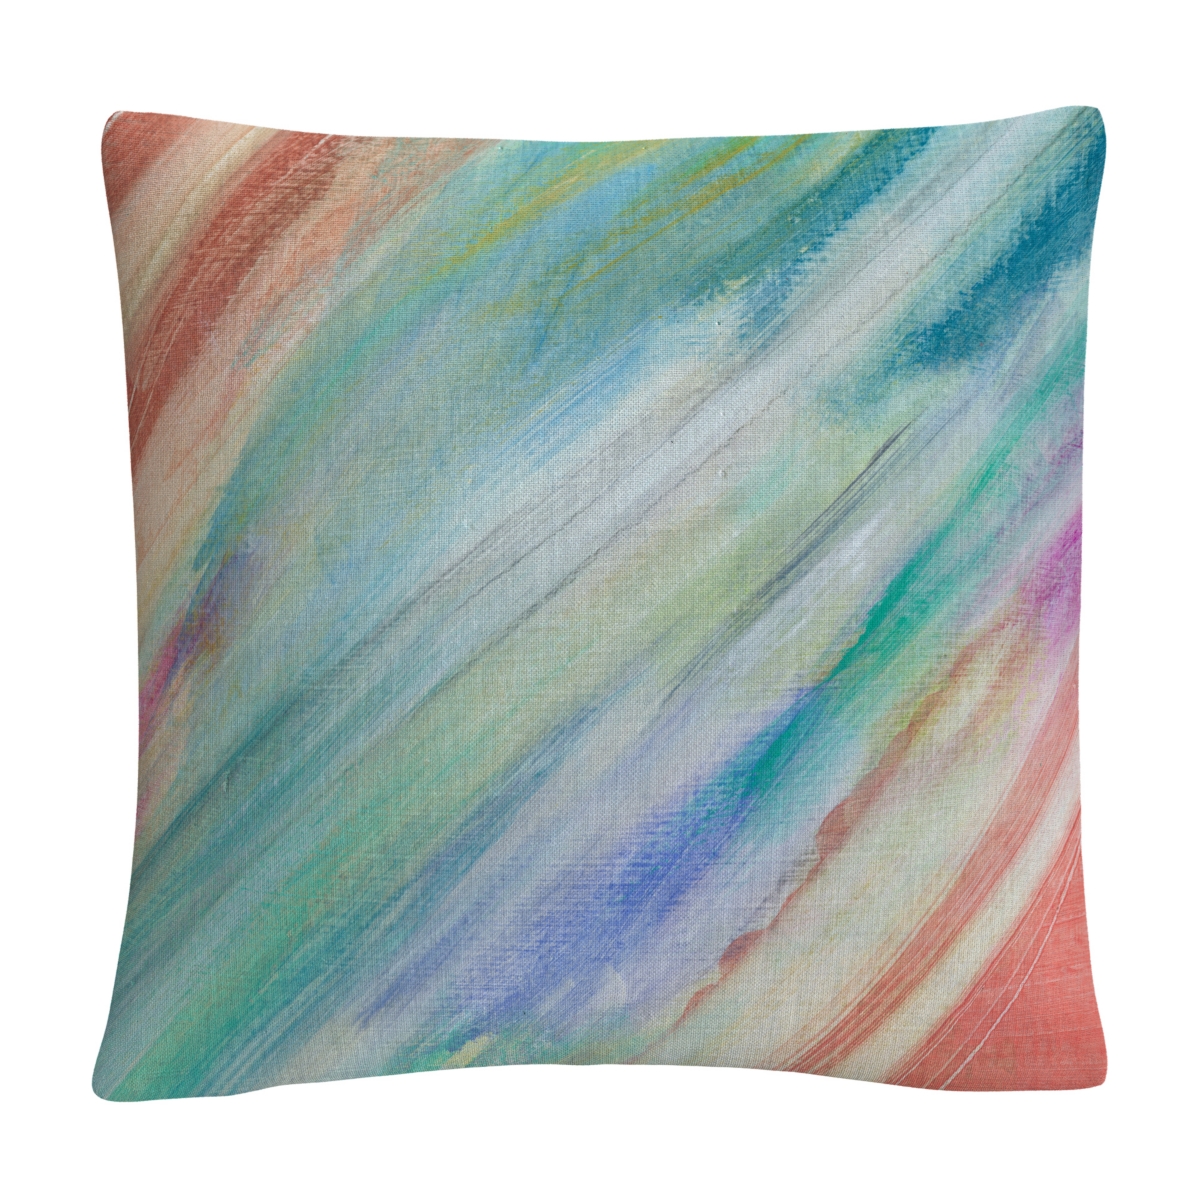 Anthony Sikich Sorbet Skies Colorful Shapes Line Composition Decorative Pillow, 16 x 16